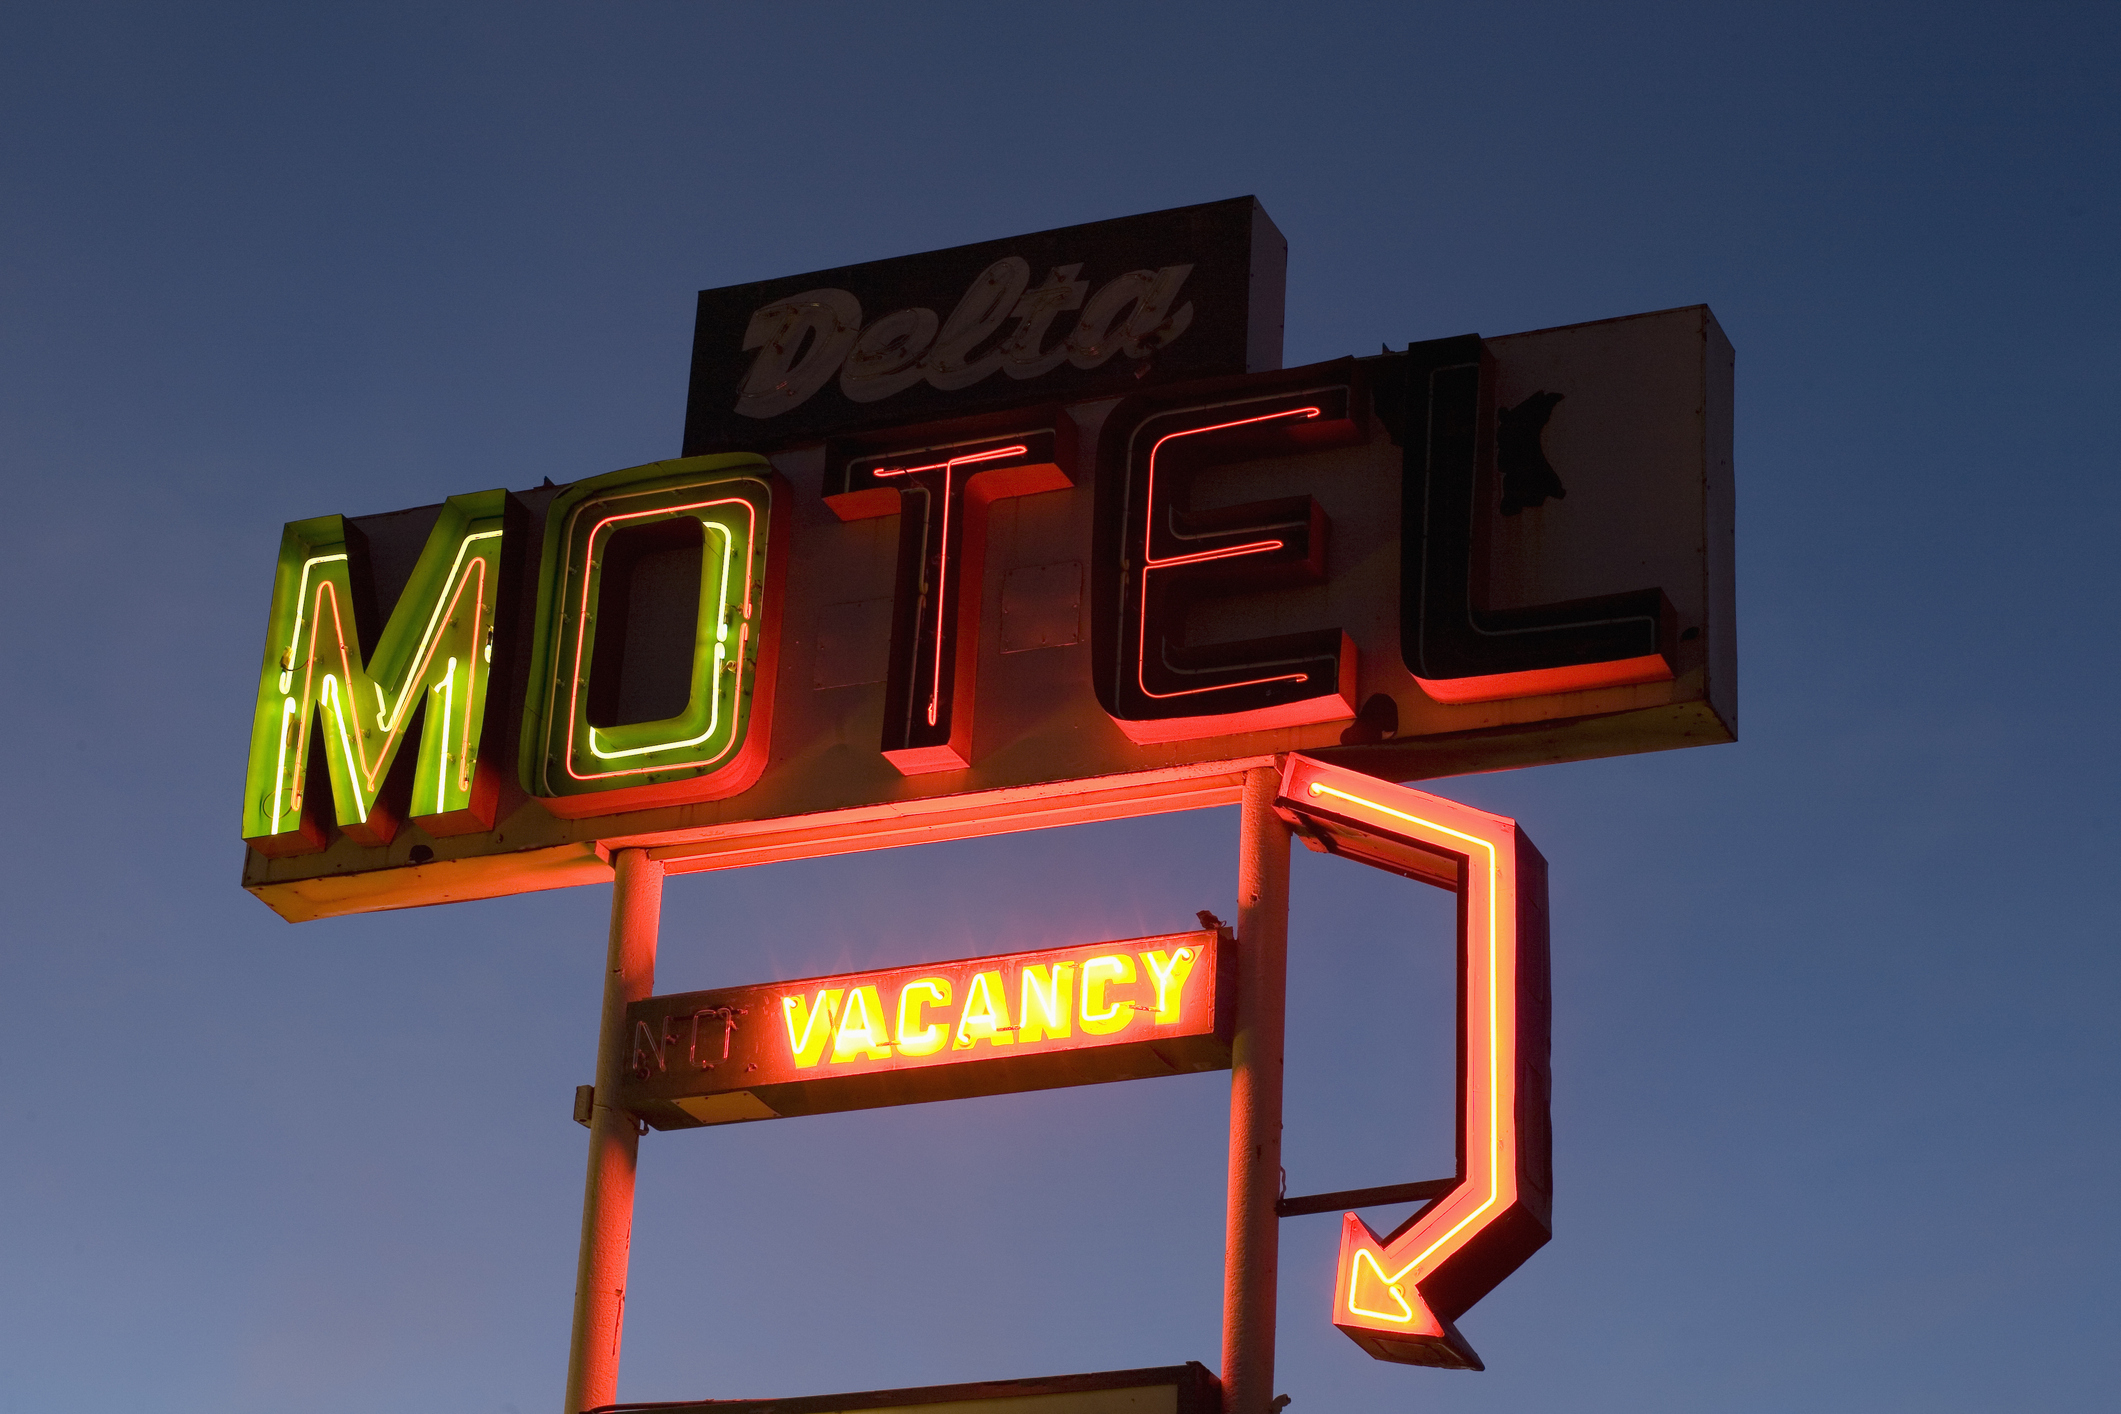 Neon sign for Delta Motel at dusk, with a lit &quot;NO VACANCY&quot; notice